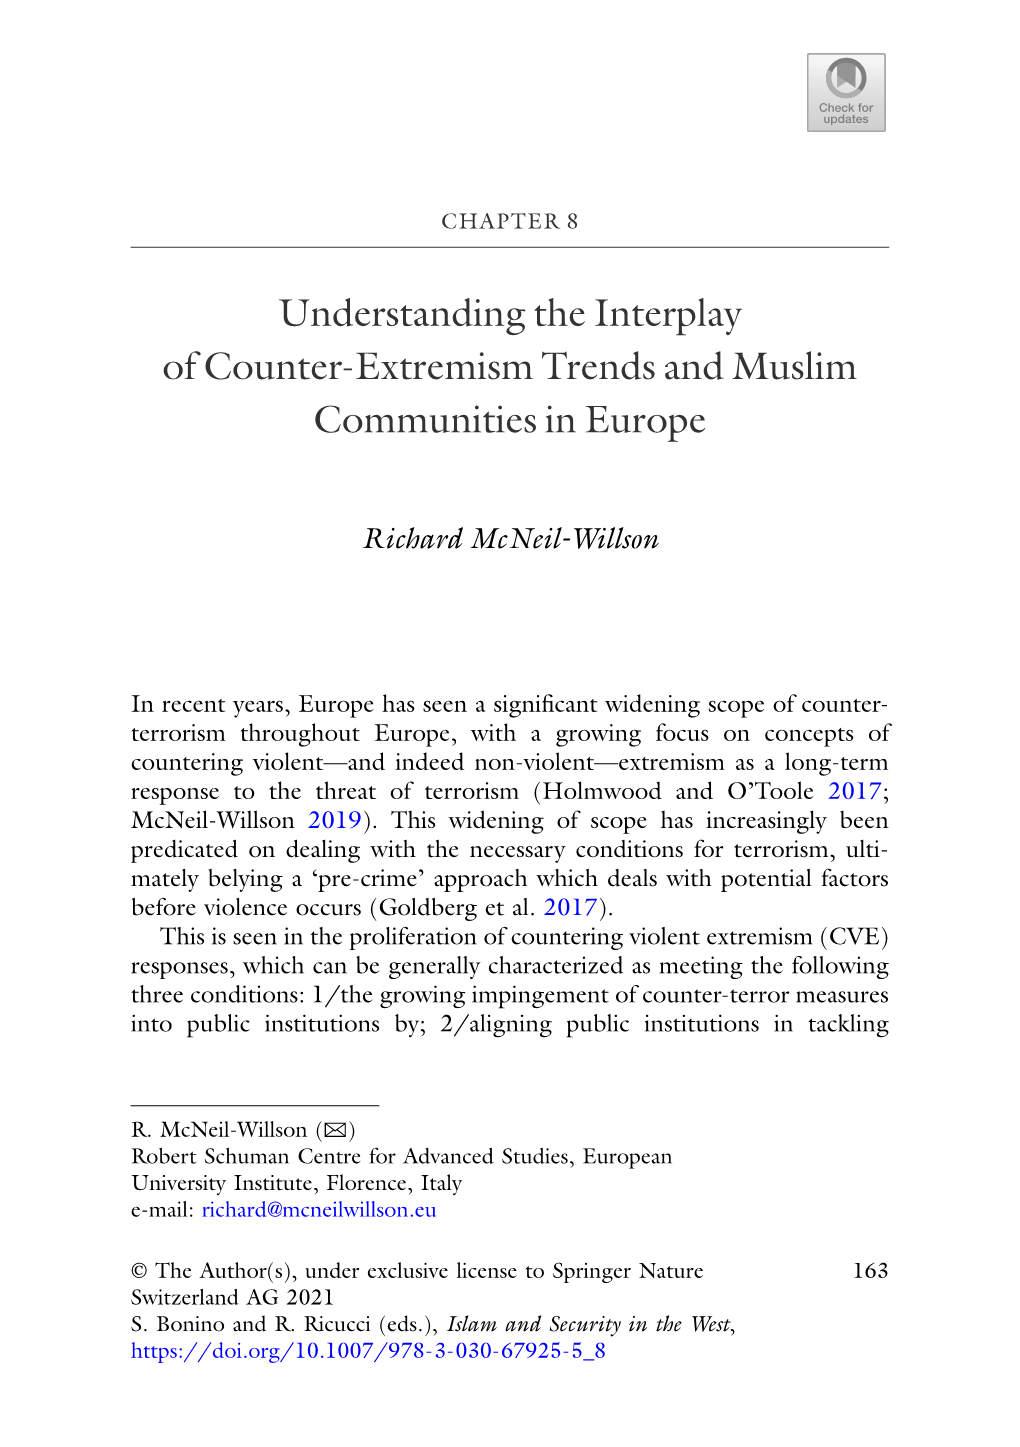 Understanding the Interplay of Counter-Extremism Trends and Muslim Communities in Europe